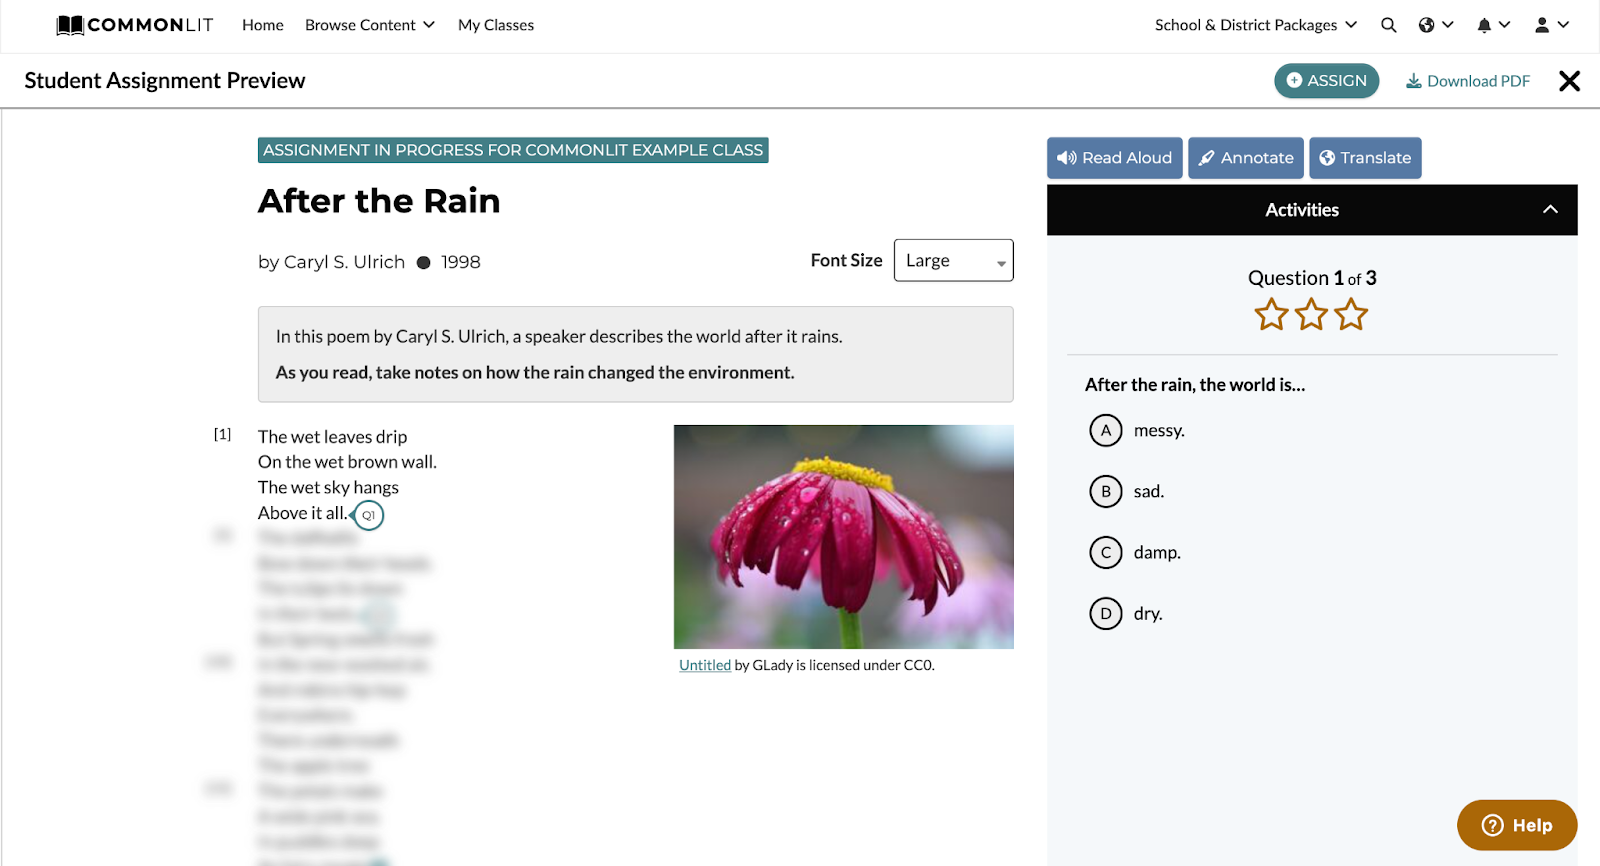 CommonLit’s “After the Rain” Lesson with Guided Reading Mode on. The first stanza of the short poem about happiness is the only one visible and a question is displayed on the right.